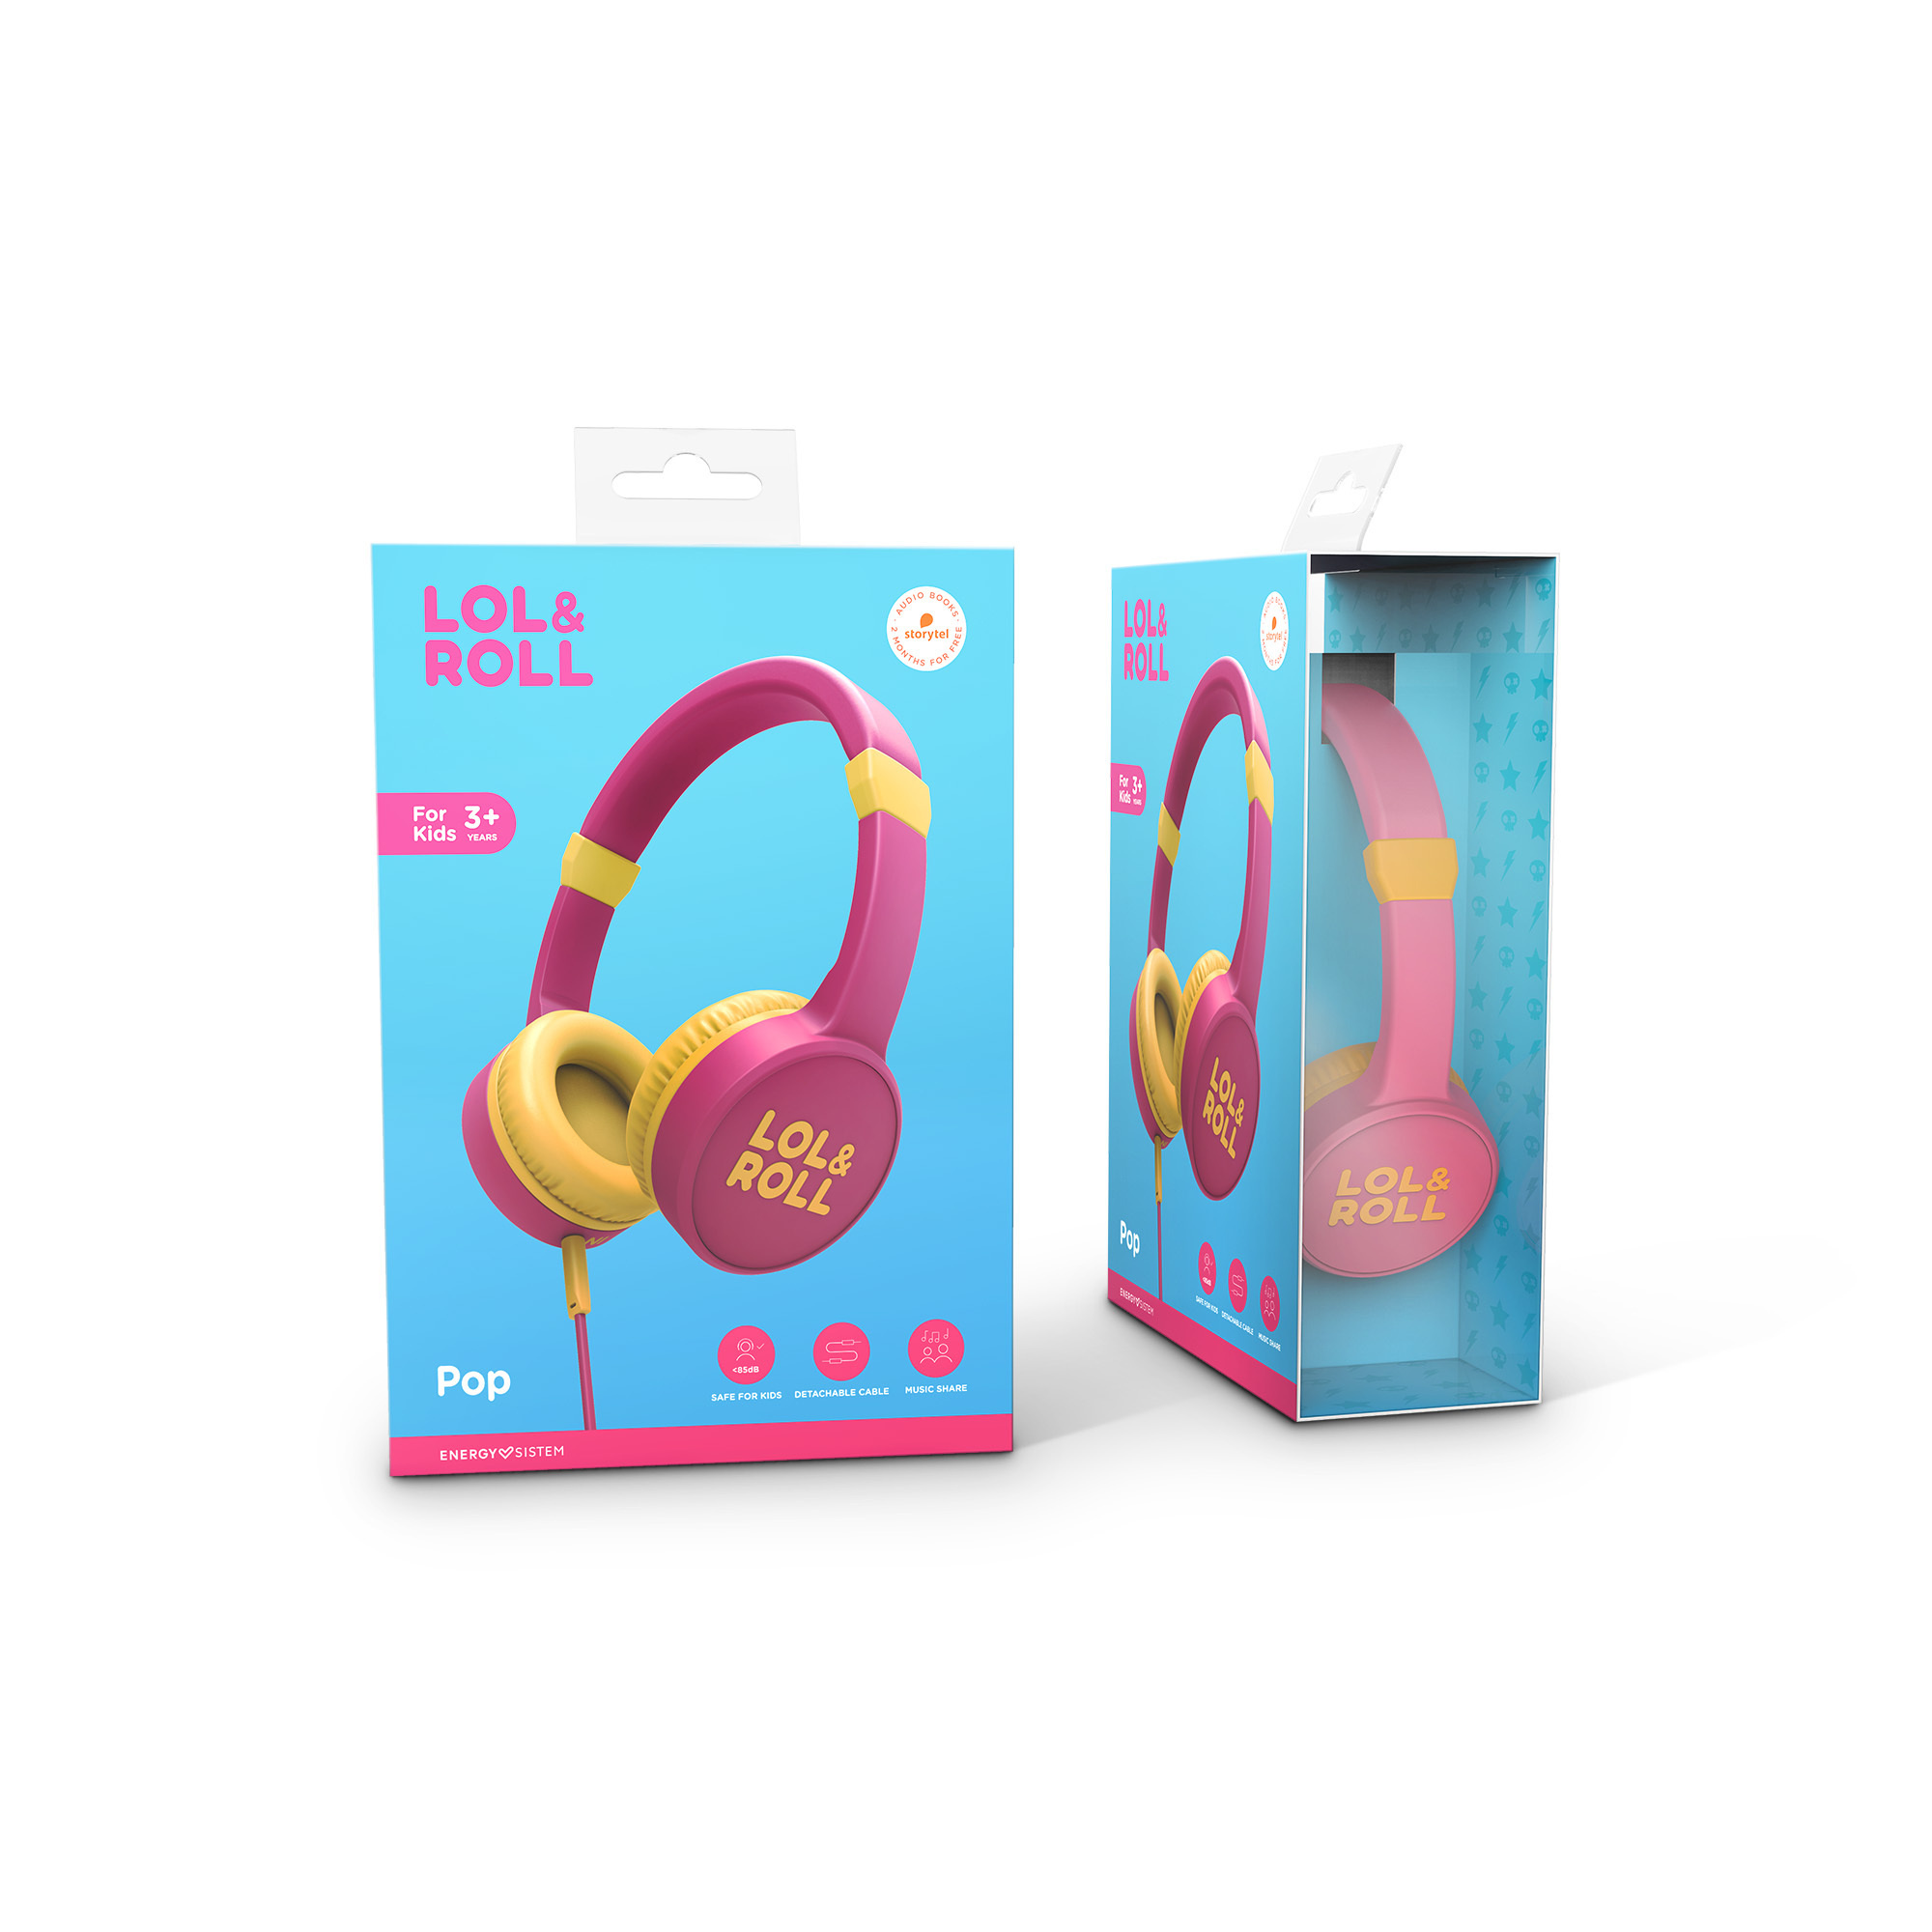 Use this children's headset with smartphones, tablets and PCs.